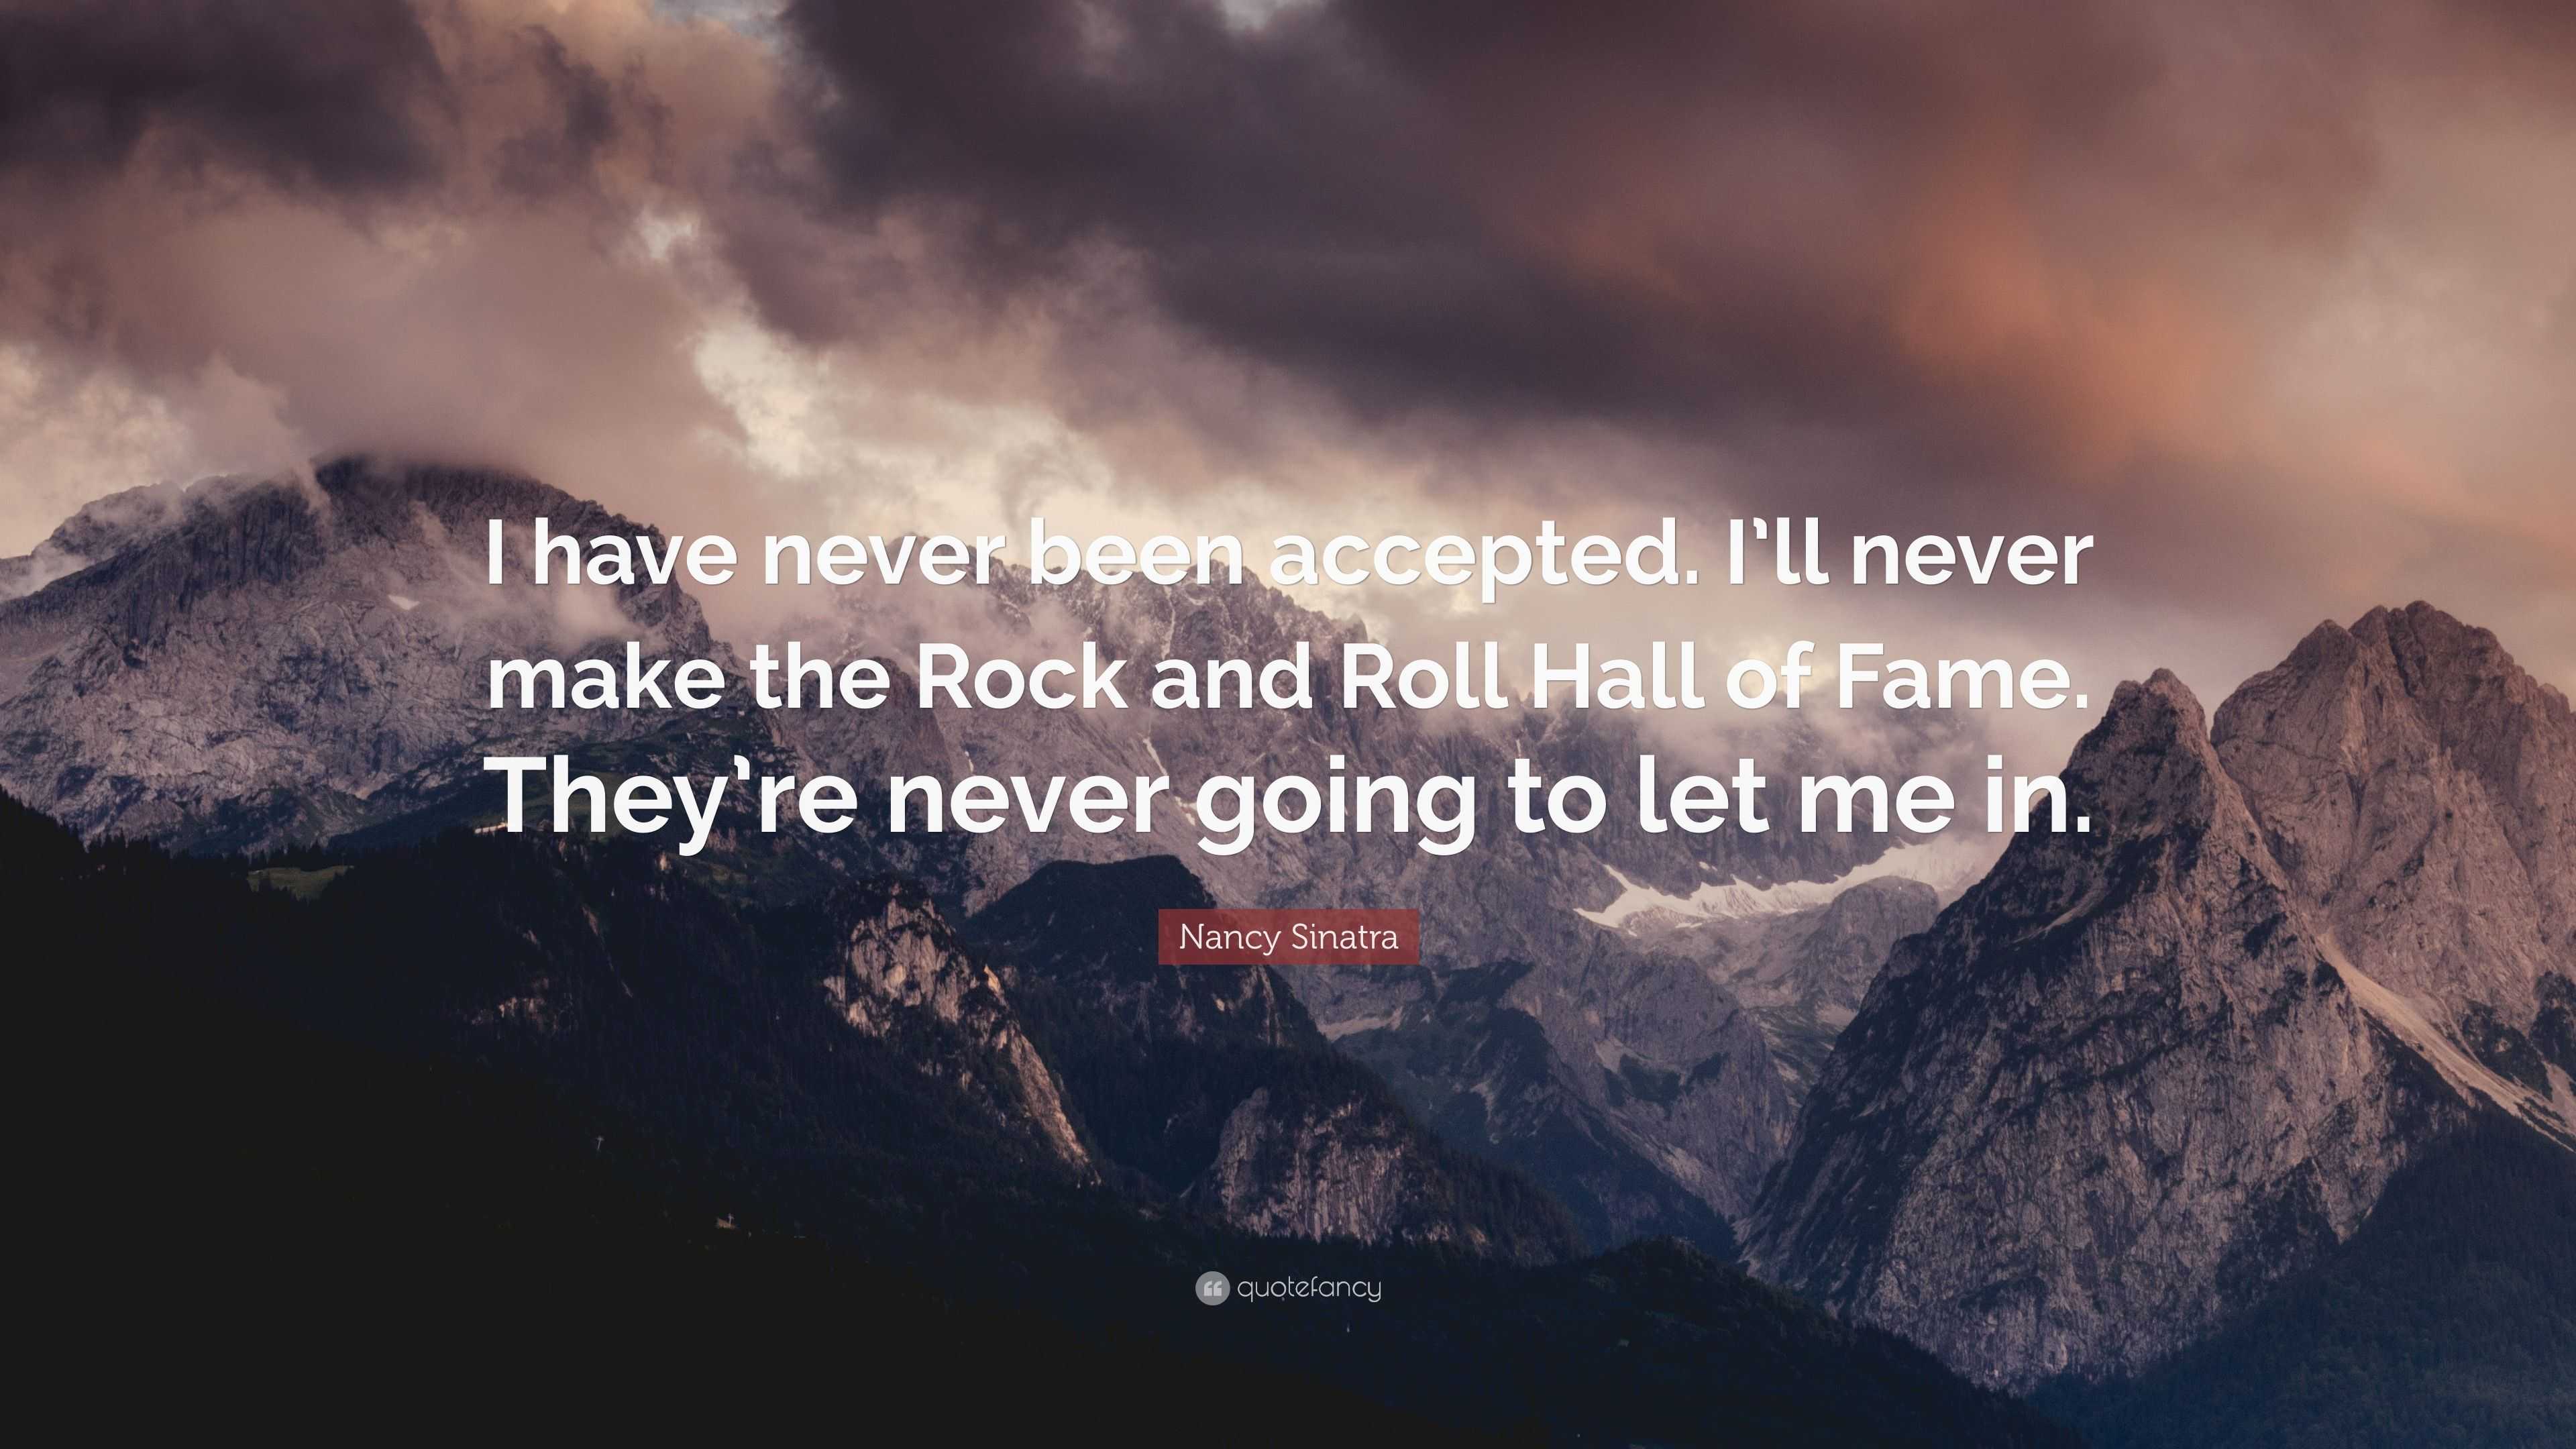 Nancy Sinatra Quote I Have Never Been Accepted I Ll Never Make The Rock And Roll Hall Of Fame They Re Never Going To Let Me In 7 Wallpapers Quotefancy nancy sinatra quote i have never been